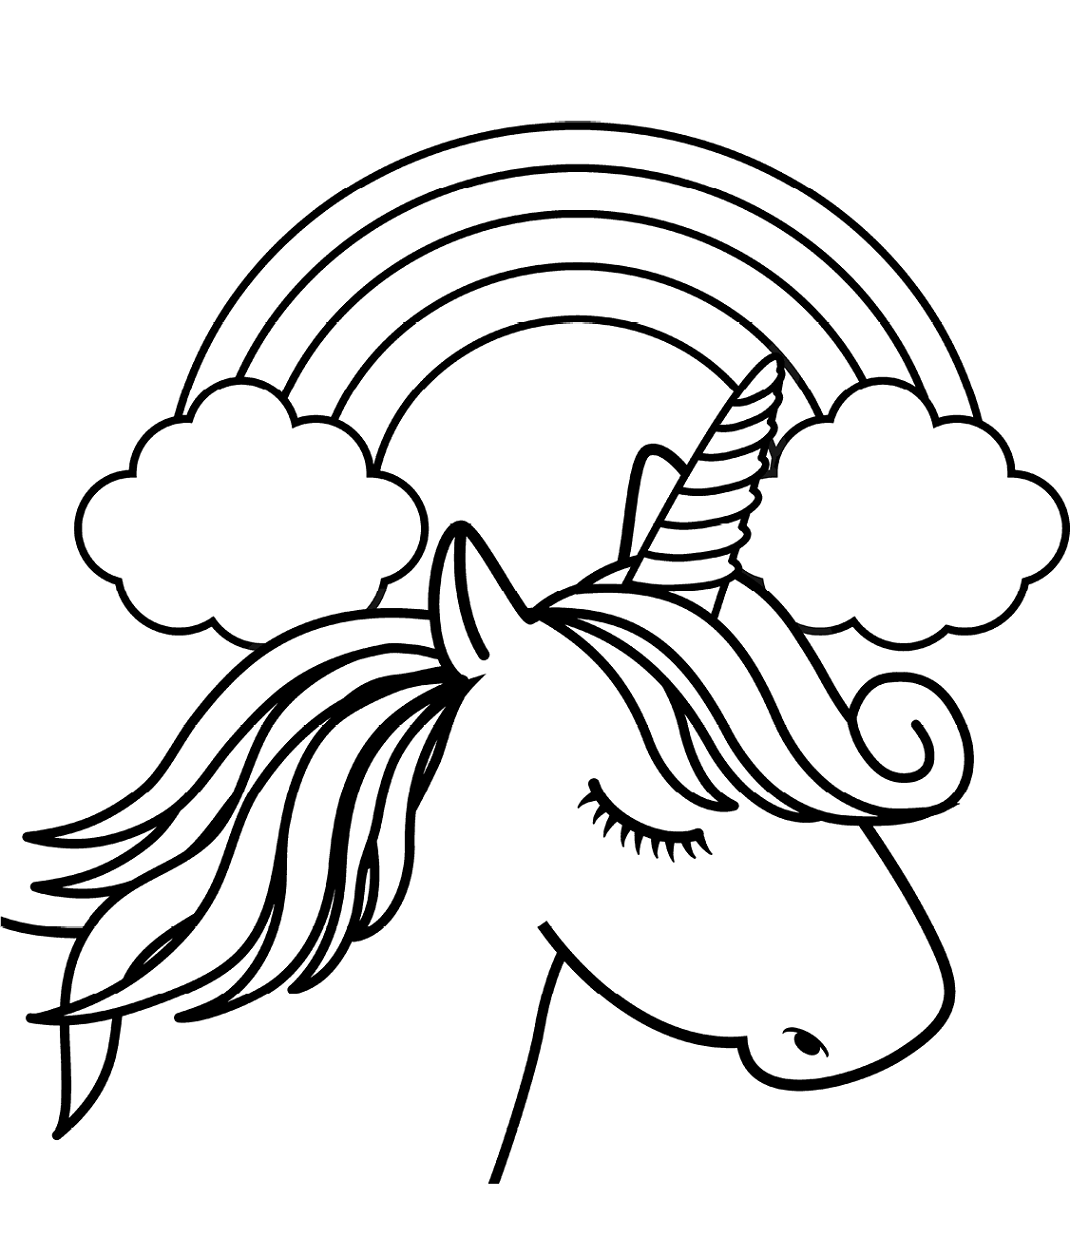 Unicorn Head In Front Of Rainbow Coloring Page - Free Printable